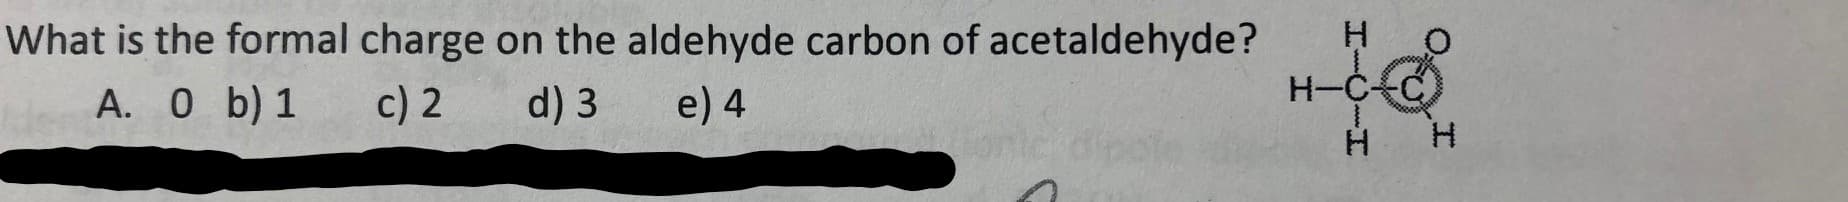 What is the formal charge on the aldehyde carbon of acetaldehyde?
H O
H-CC
A. 0 b) 1
c) 2
d) 3
e) 4
H
I
